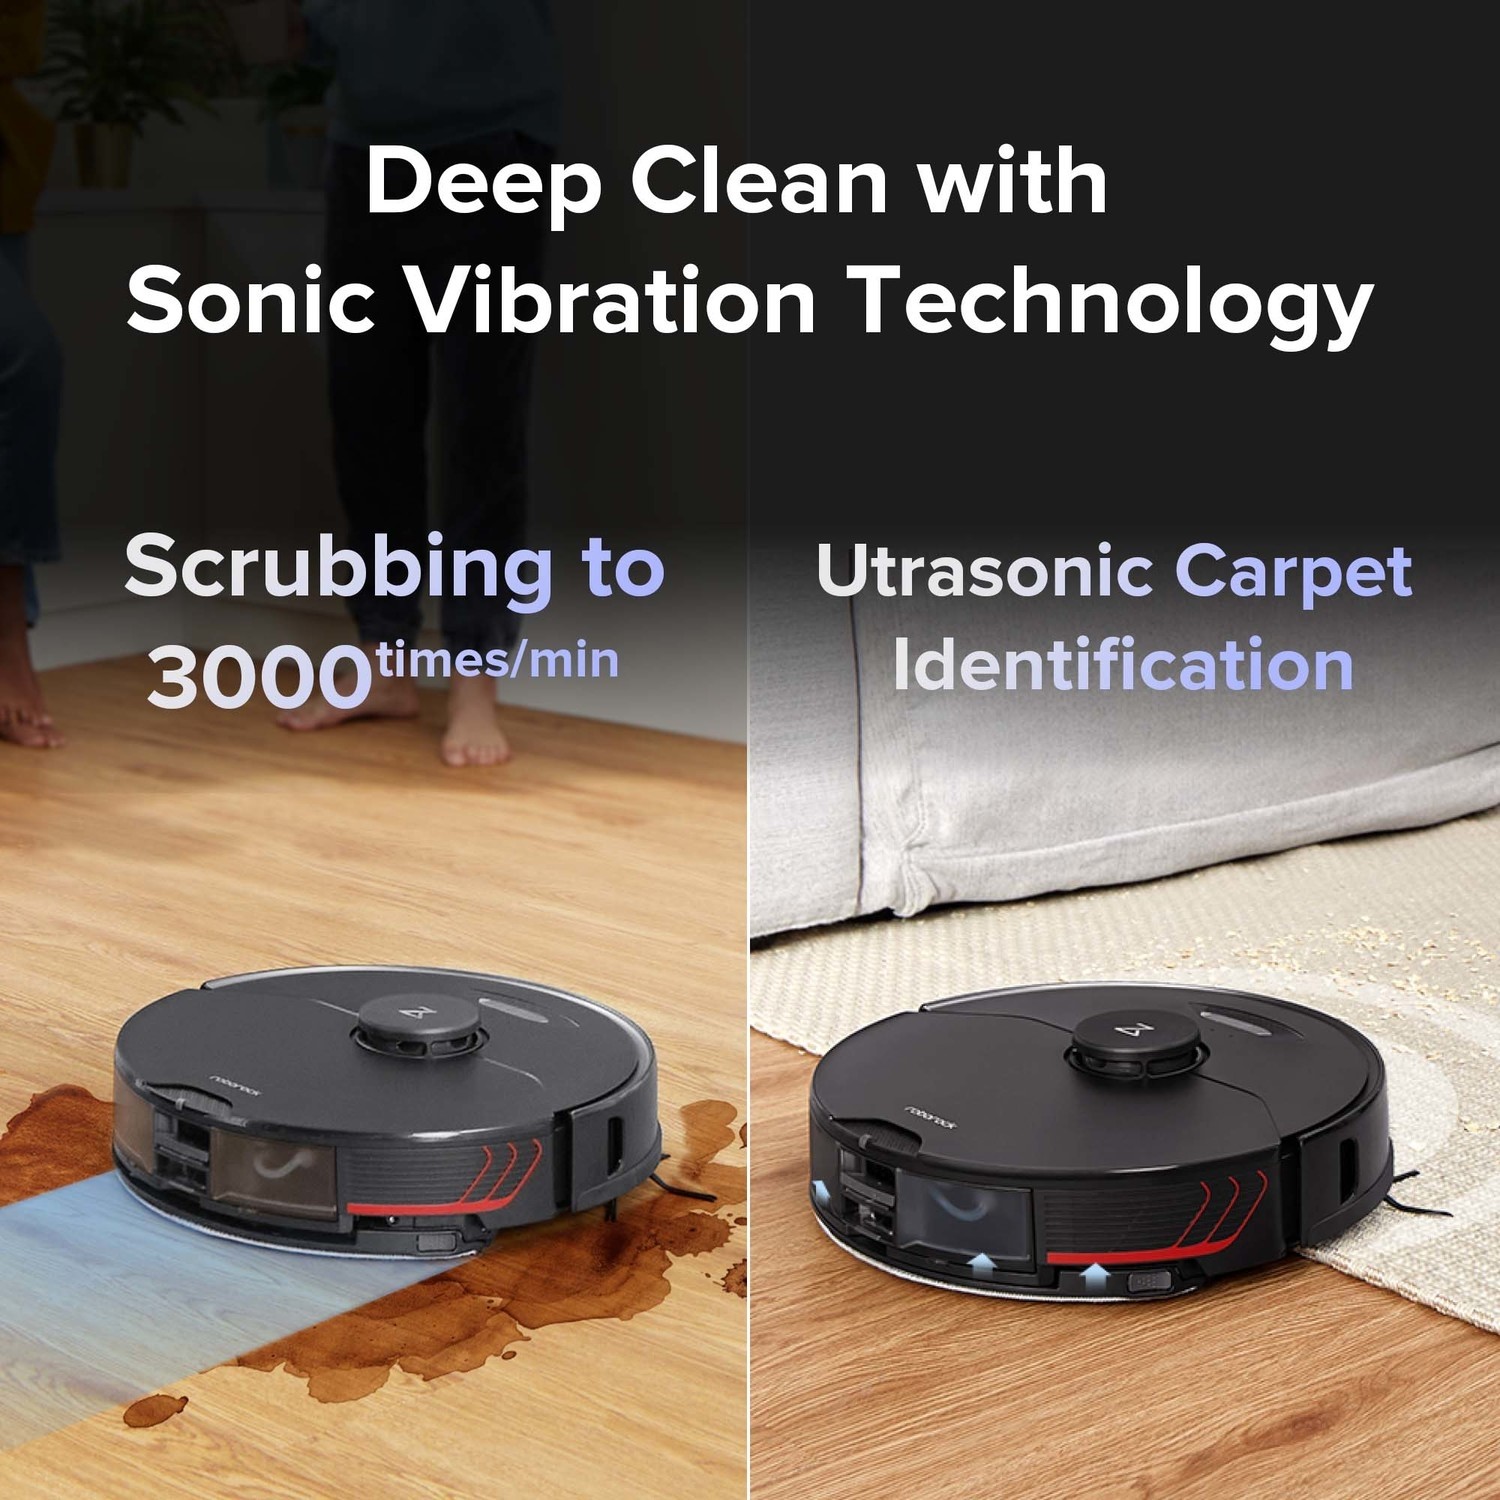 Roborock S7 MaxV Ultra Robot Vacuum Cleaner with Self-Emptying and